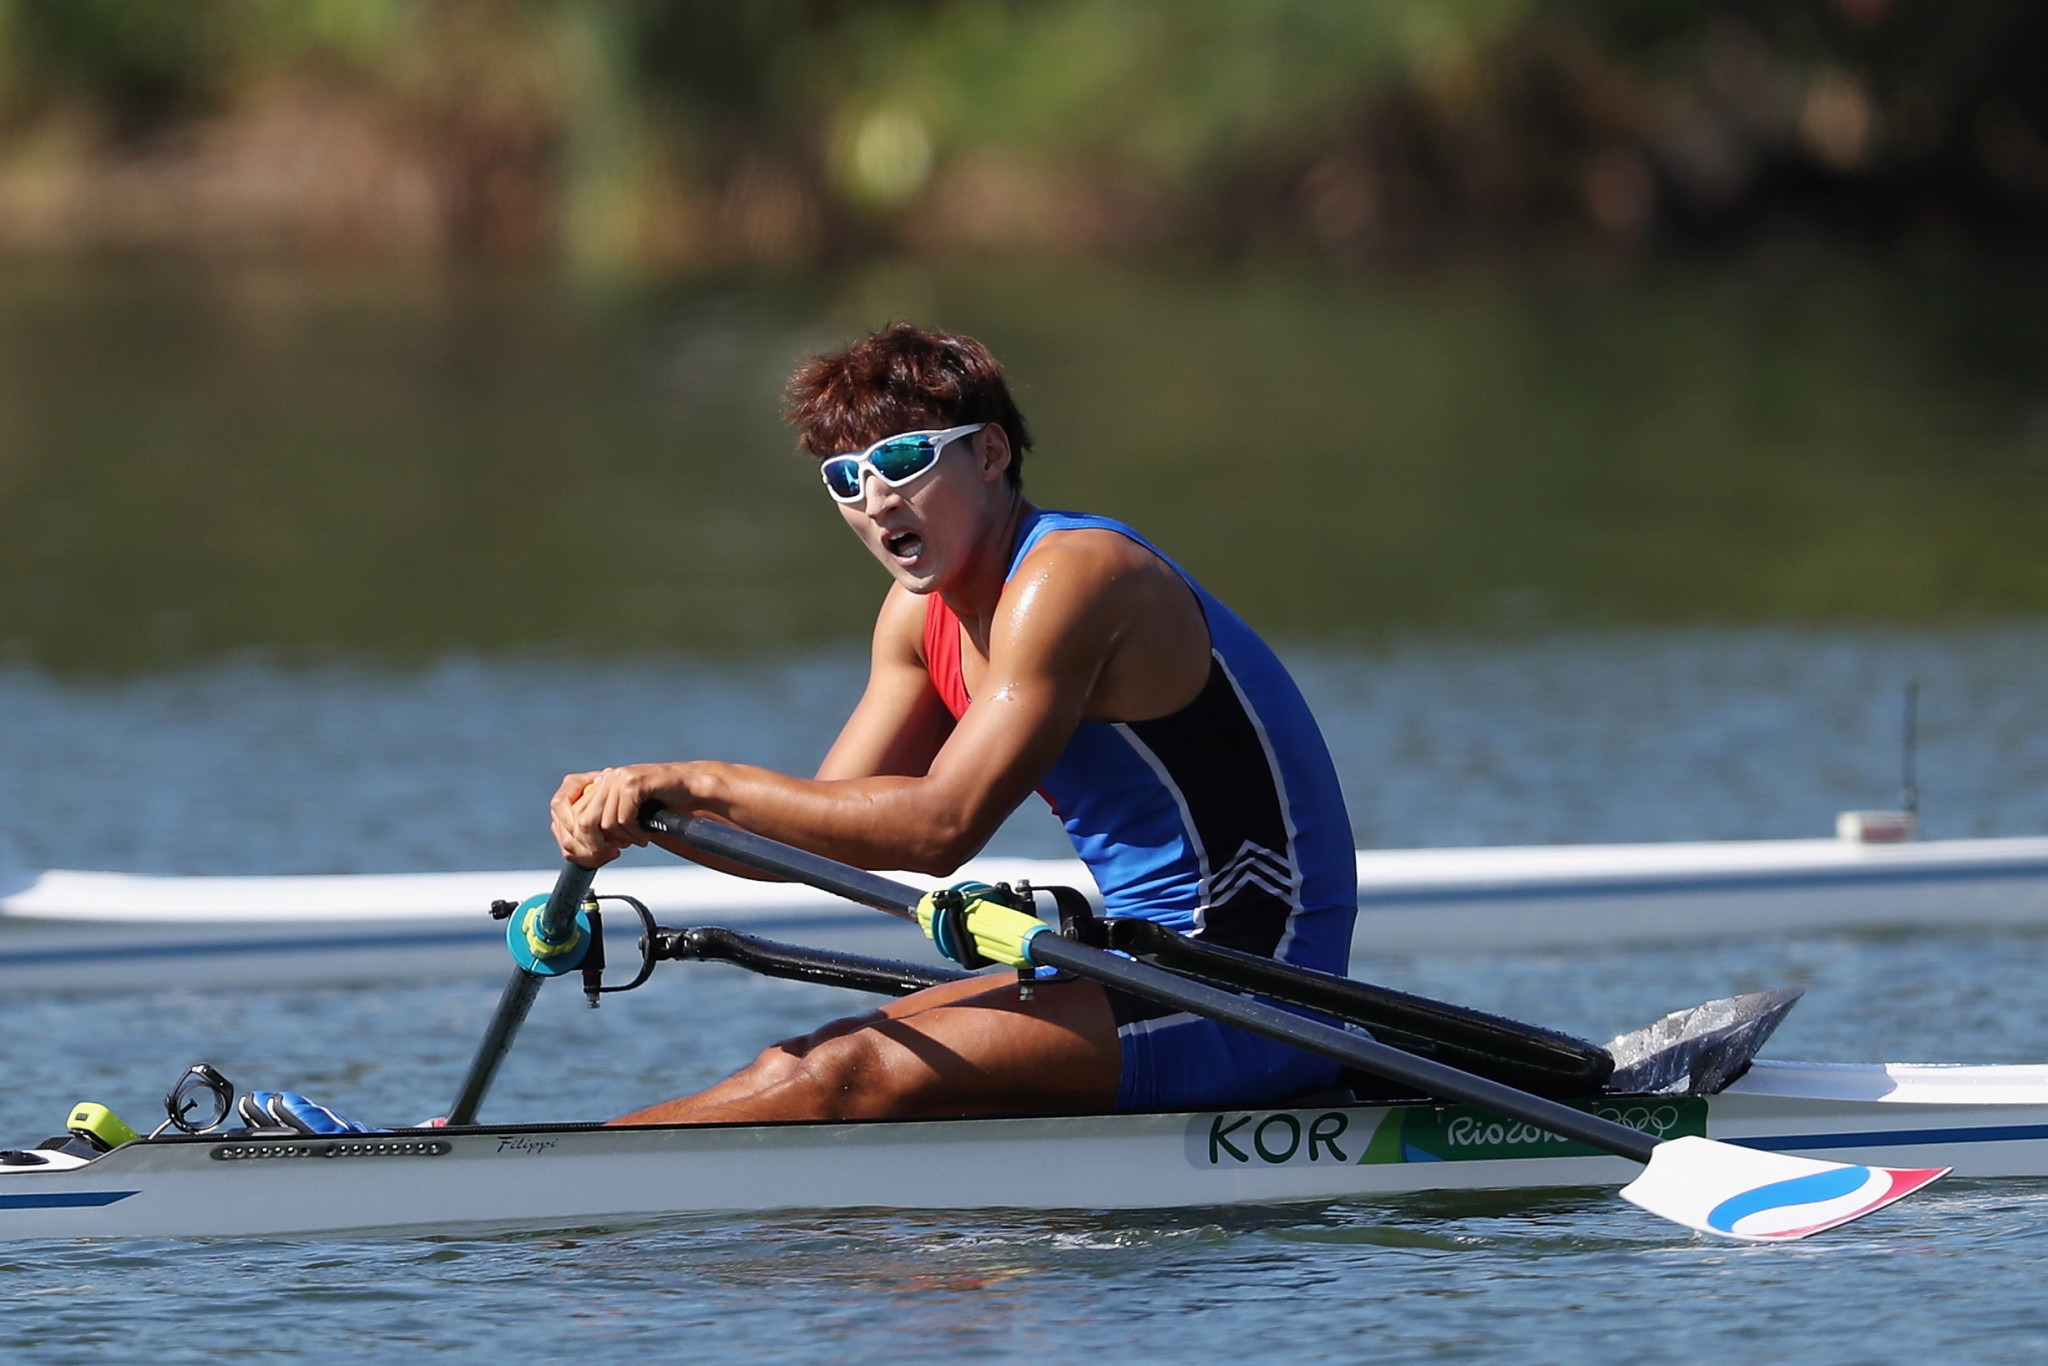 Kim Dong-yong was one of two South Korean rowers at Rio 2016 ©Getty Images